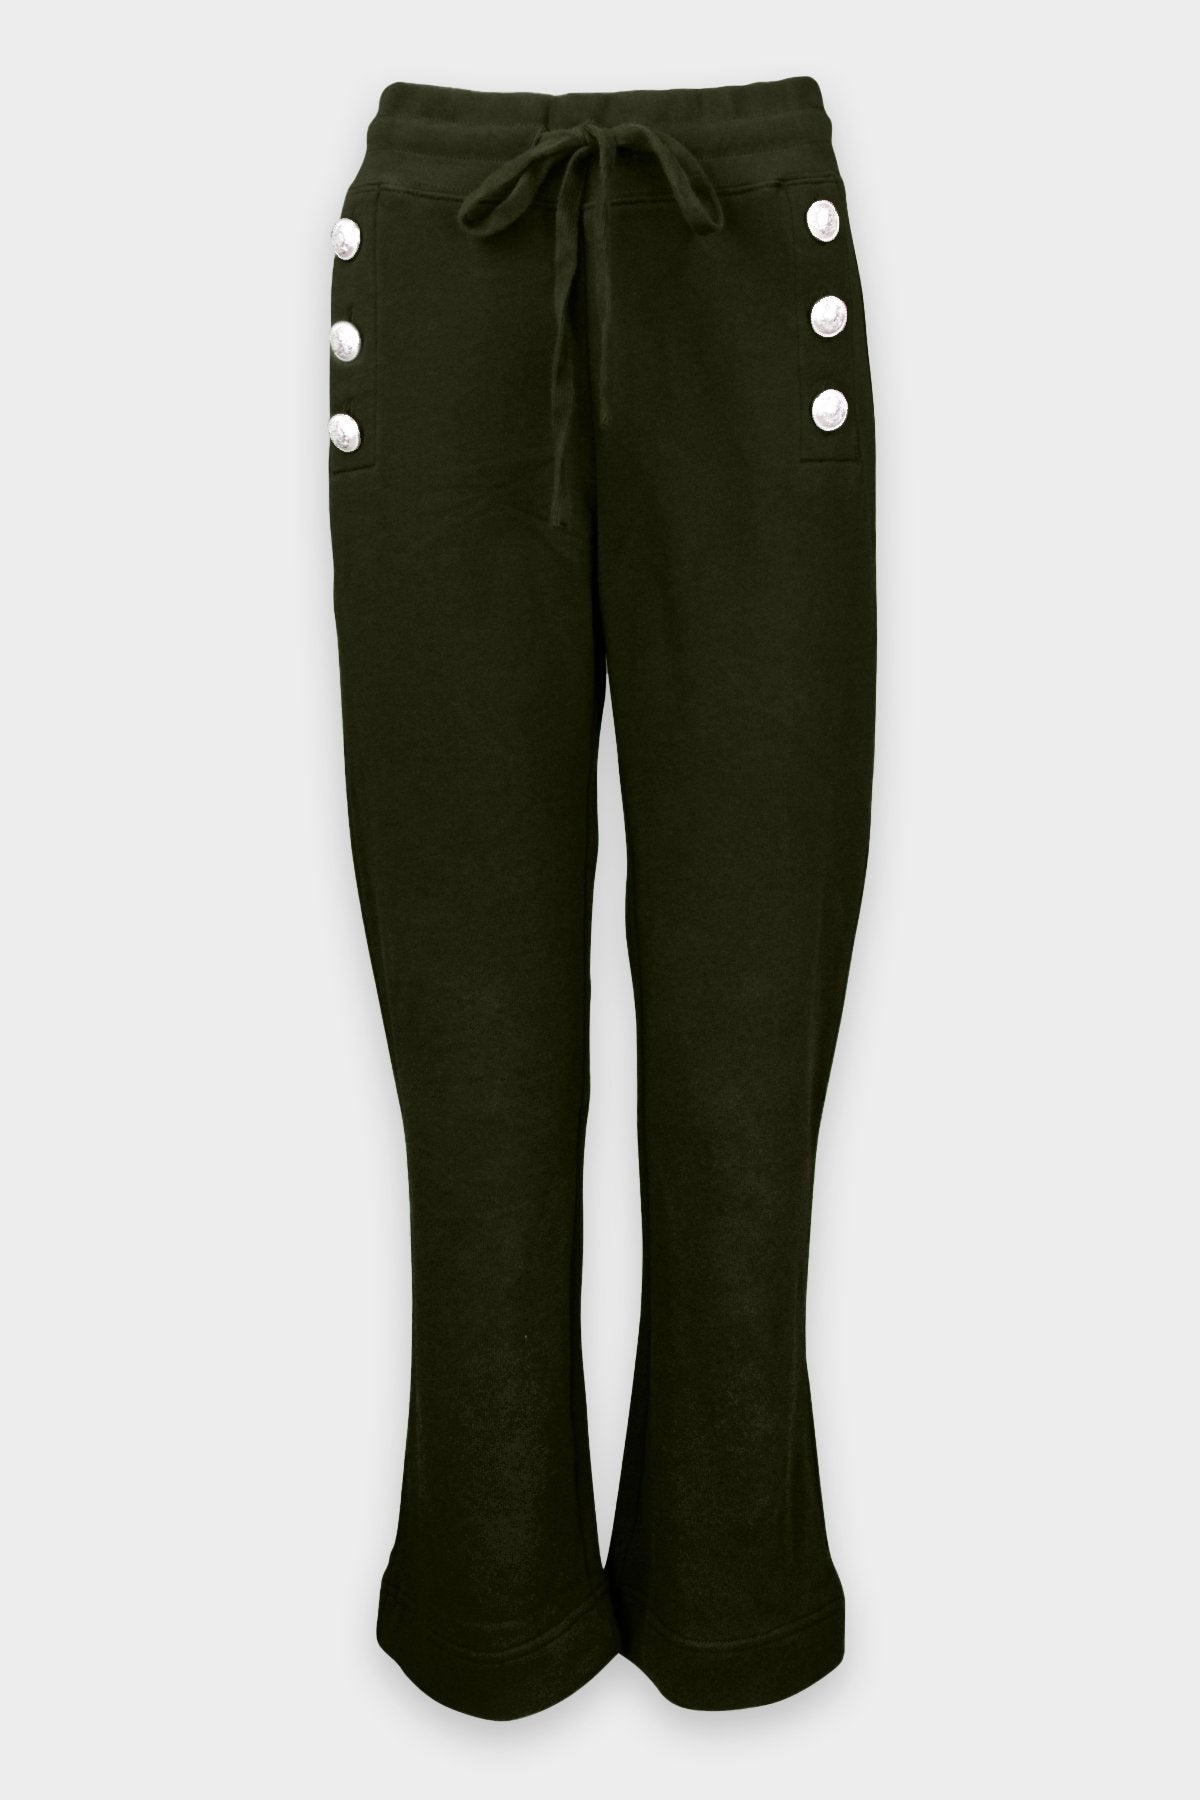 Sian Cropped Flare Sweat Pant with Sailor Buttons in Loden - shop-olivia.com